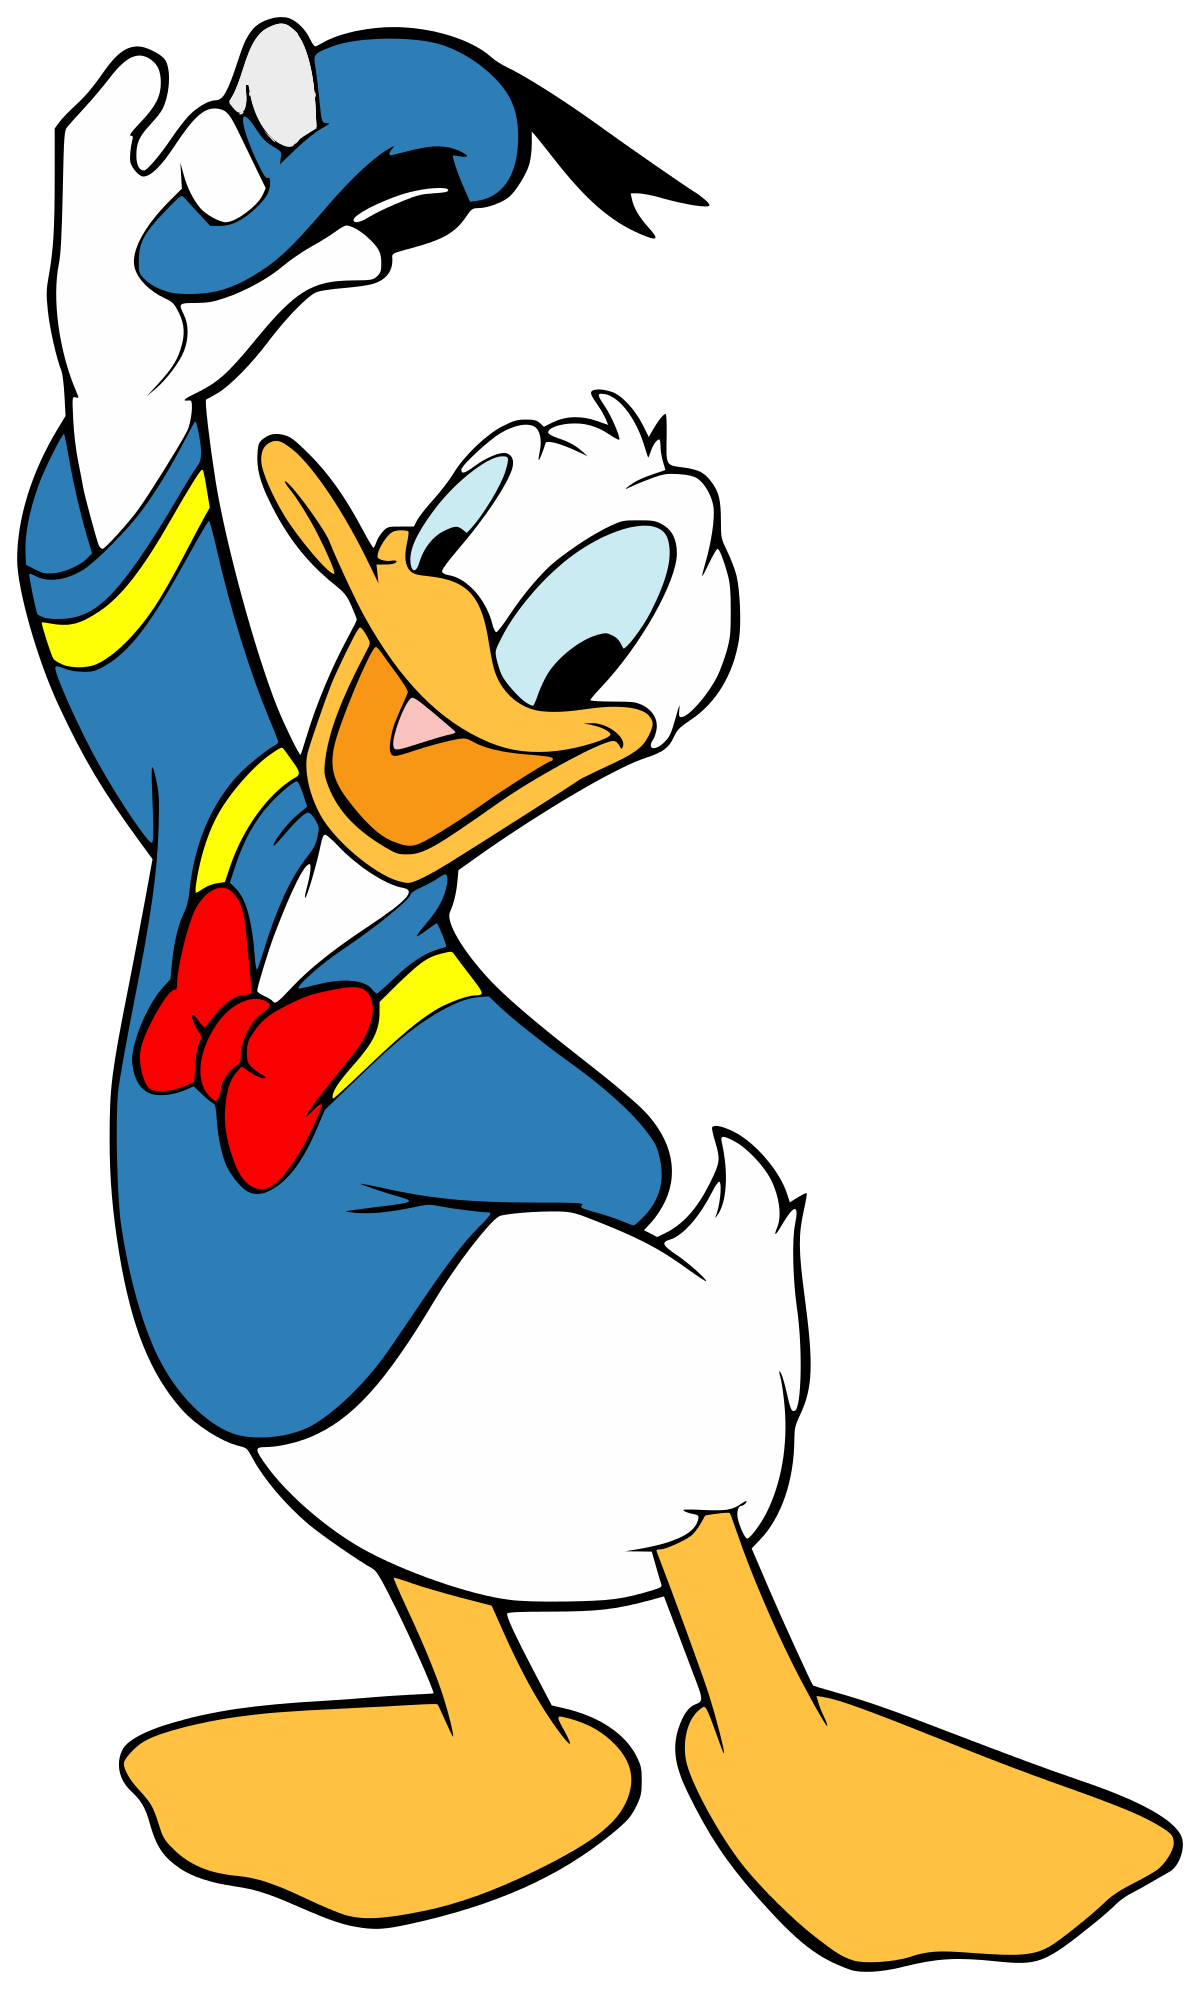 Donald duck png images. Duckling clipart happy